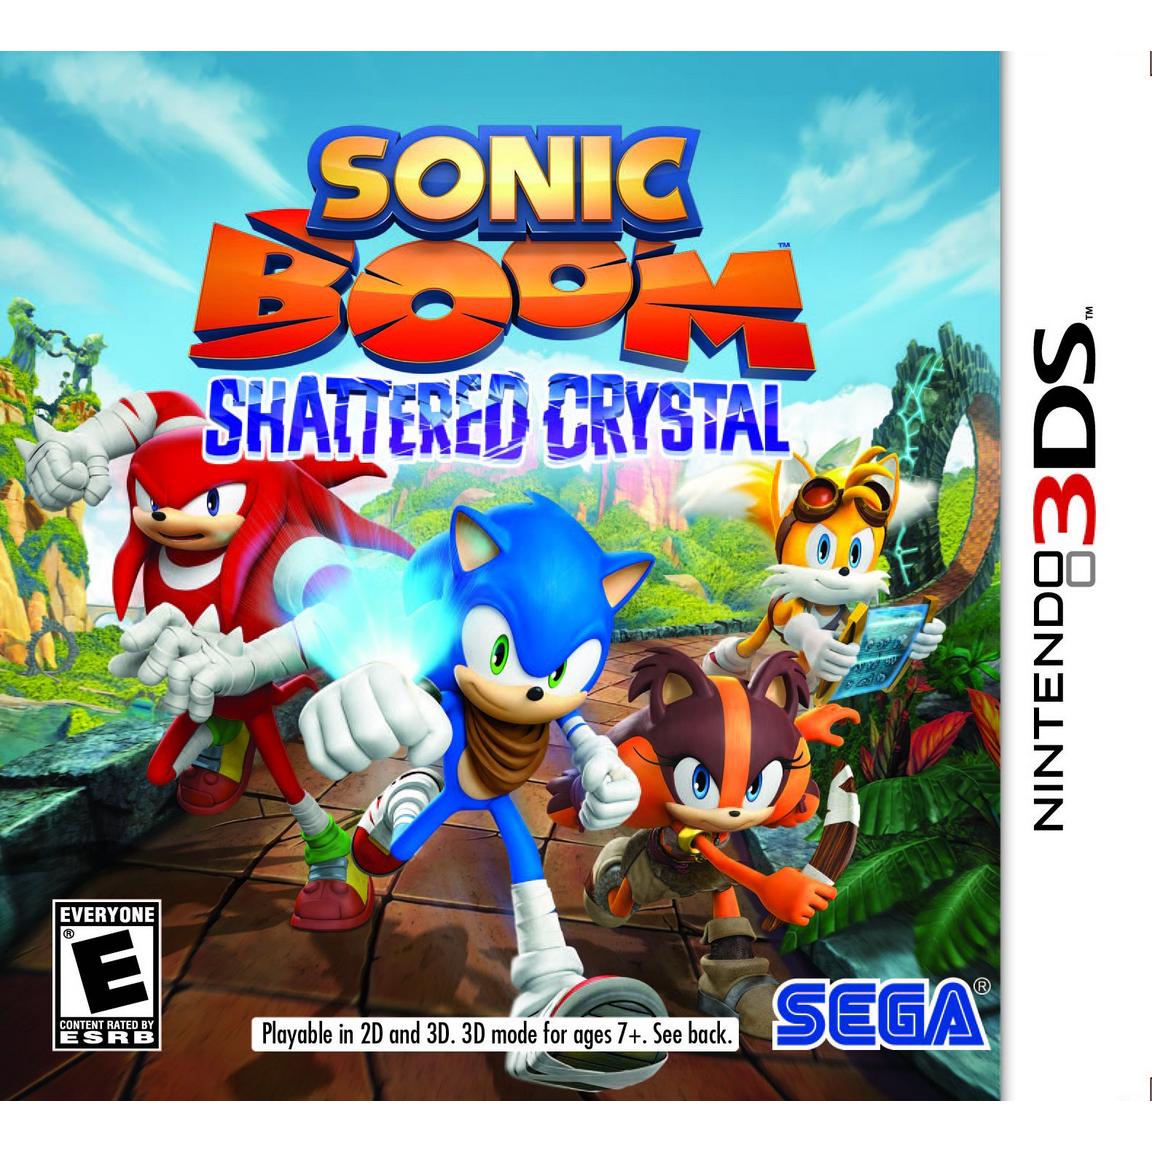 Sonic Boom: Shattered Crystal - Nintendo 3DS, Pre-Owned